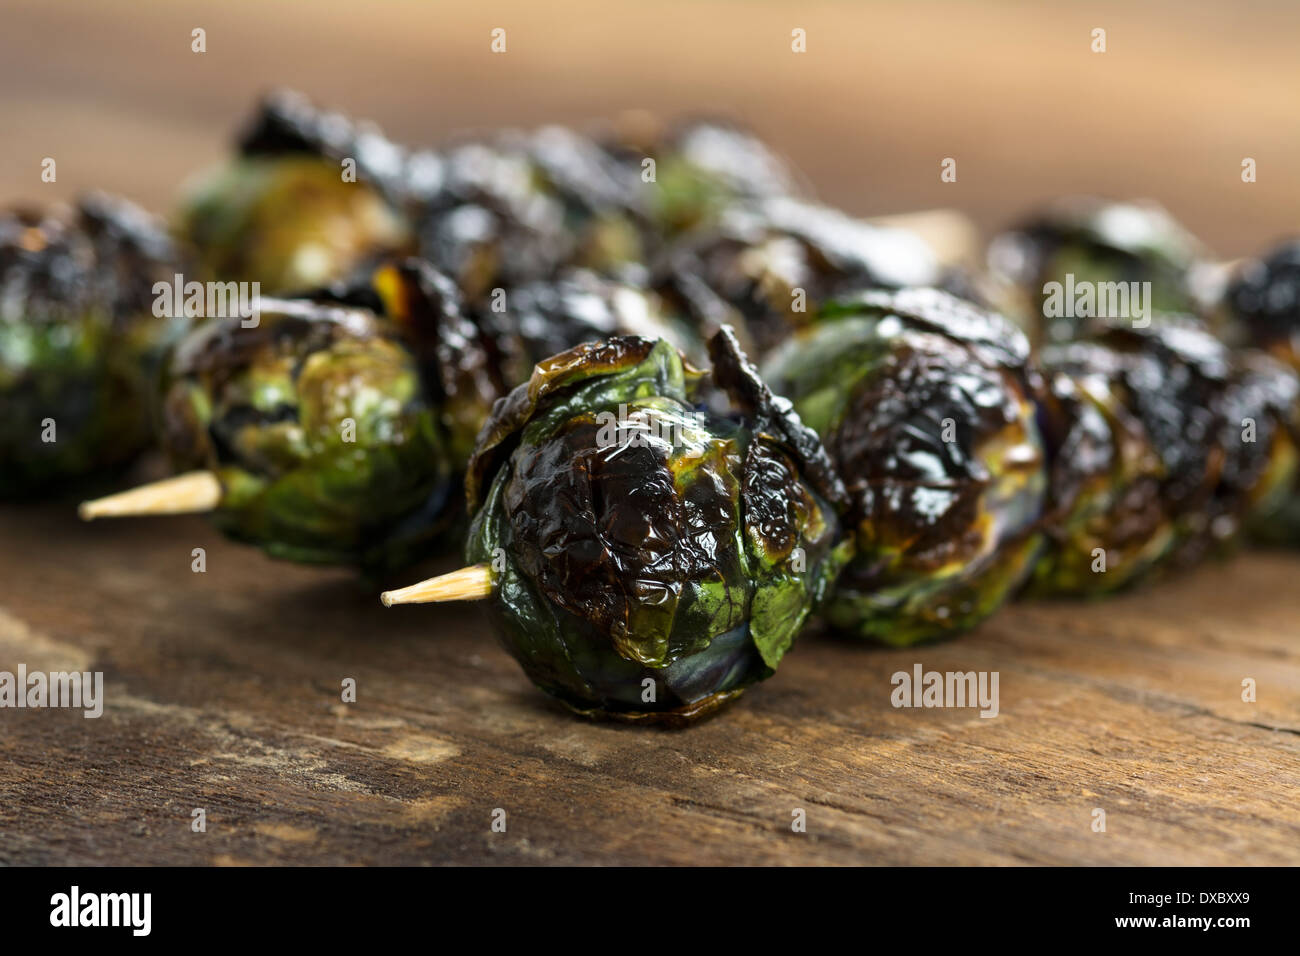 Three grilled organic purple Brussels spouts on skewers set on wood Stock Photo